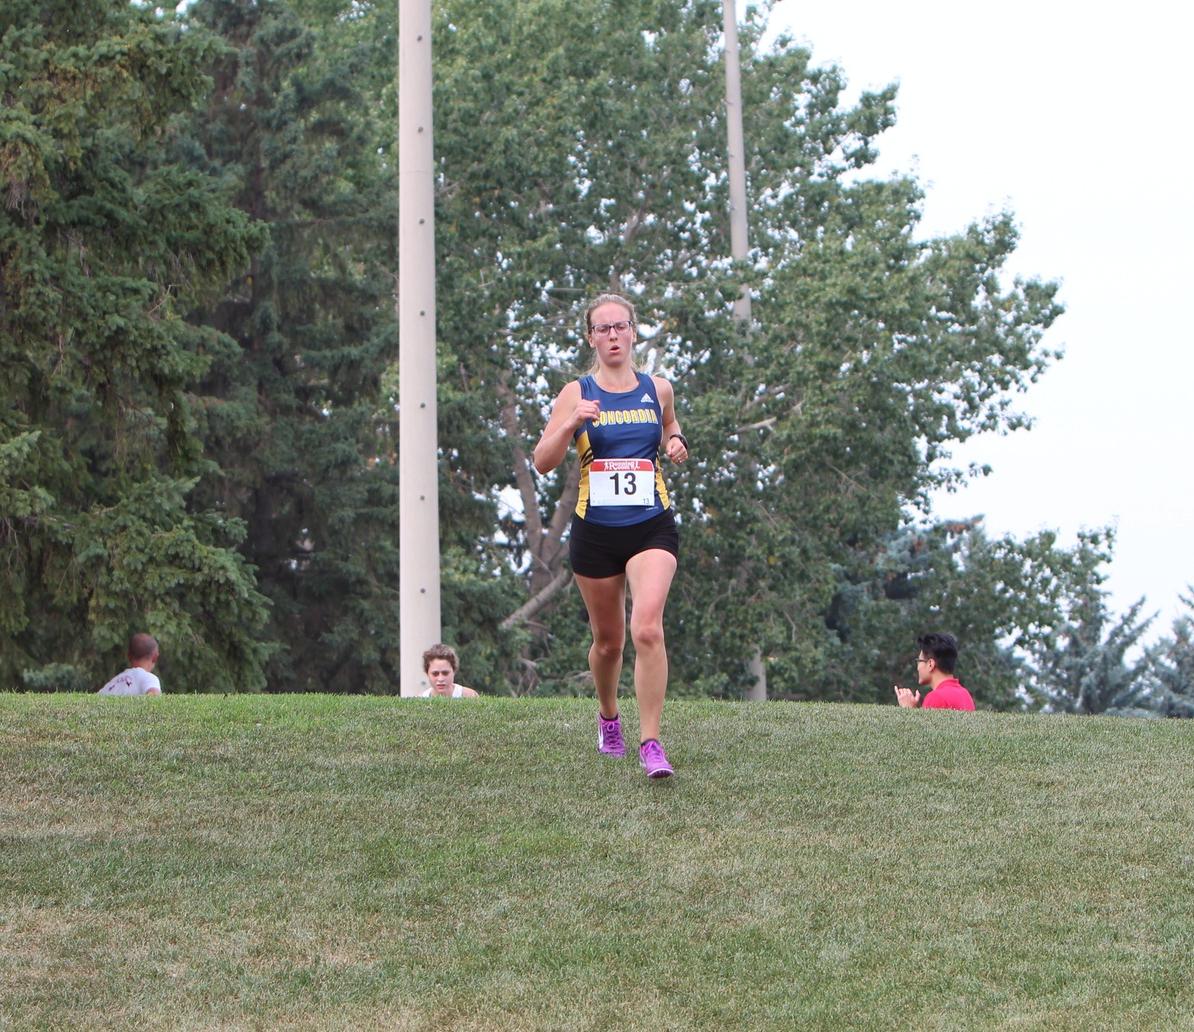 Cheeso and Nawrocki are the Top ACAC Runners in the Running Room Grand Prix #3 - North Meet